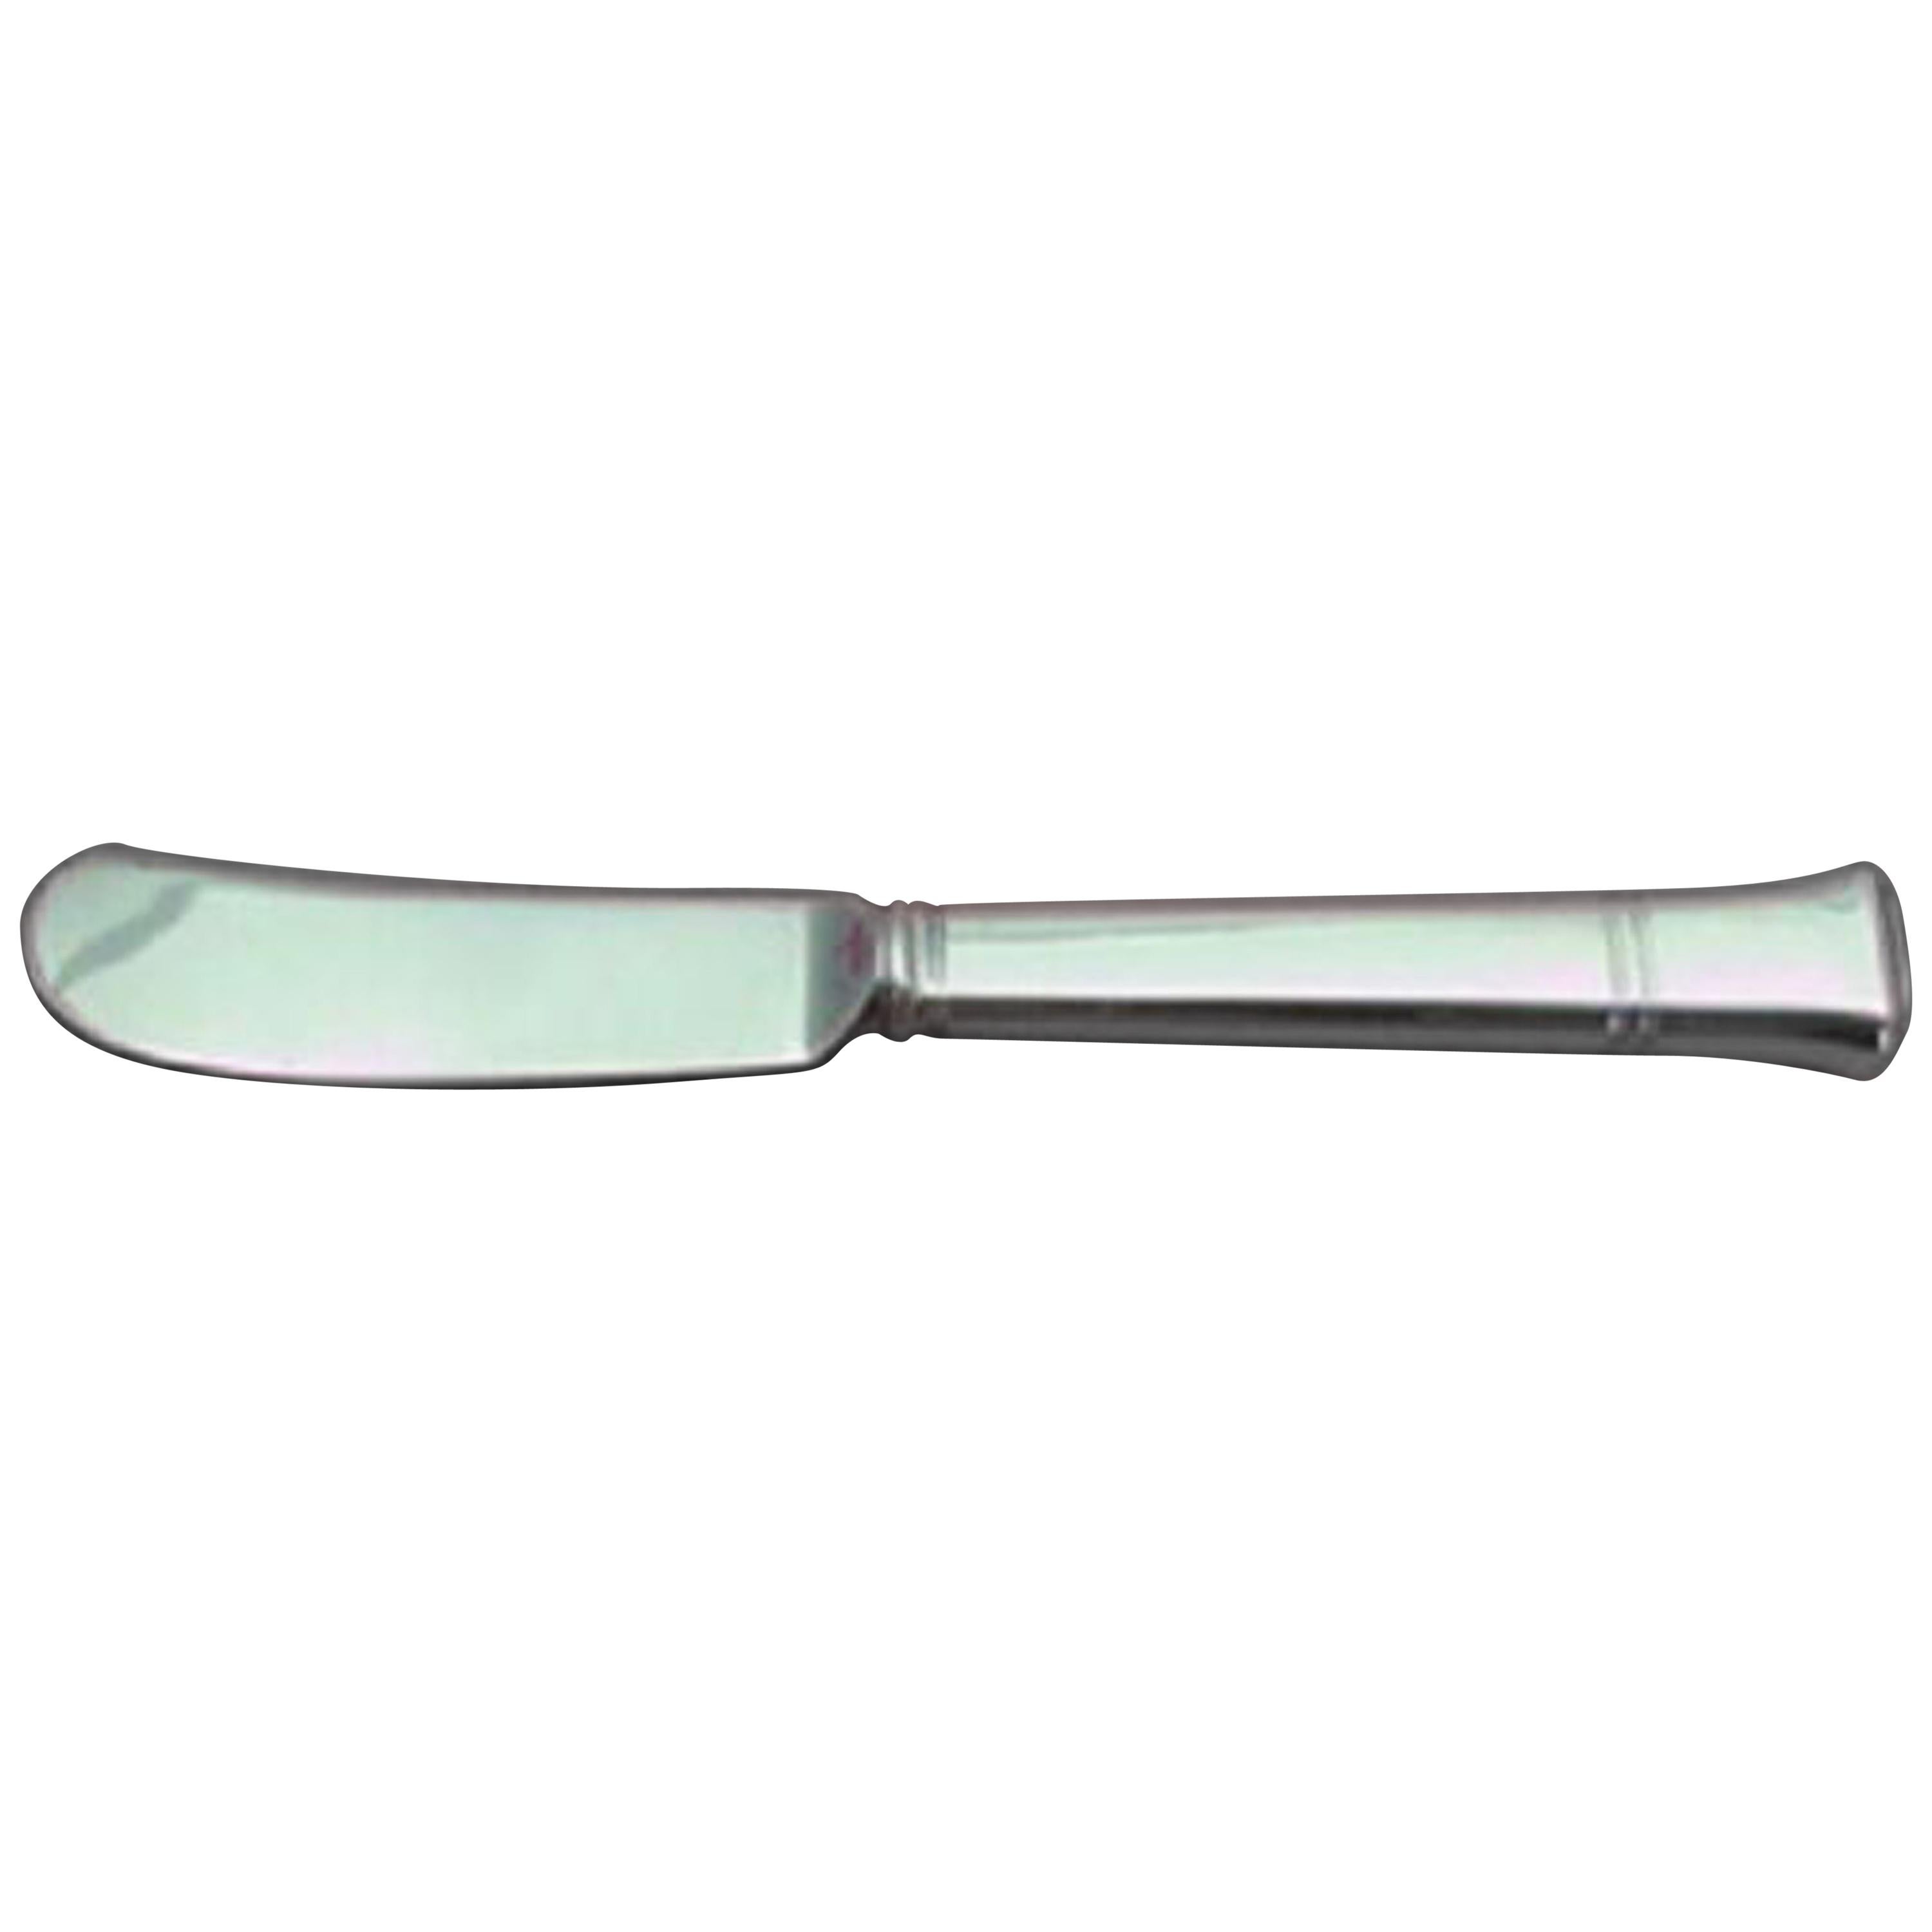 Windham by Tiffany Sterling Silver Butter Spreader Hollow Handle Paddle